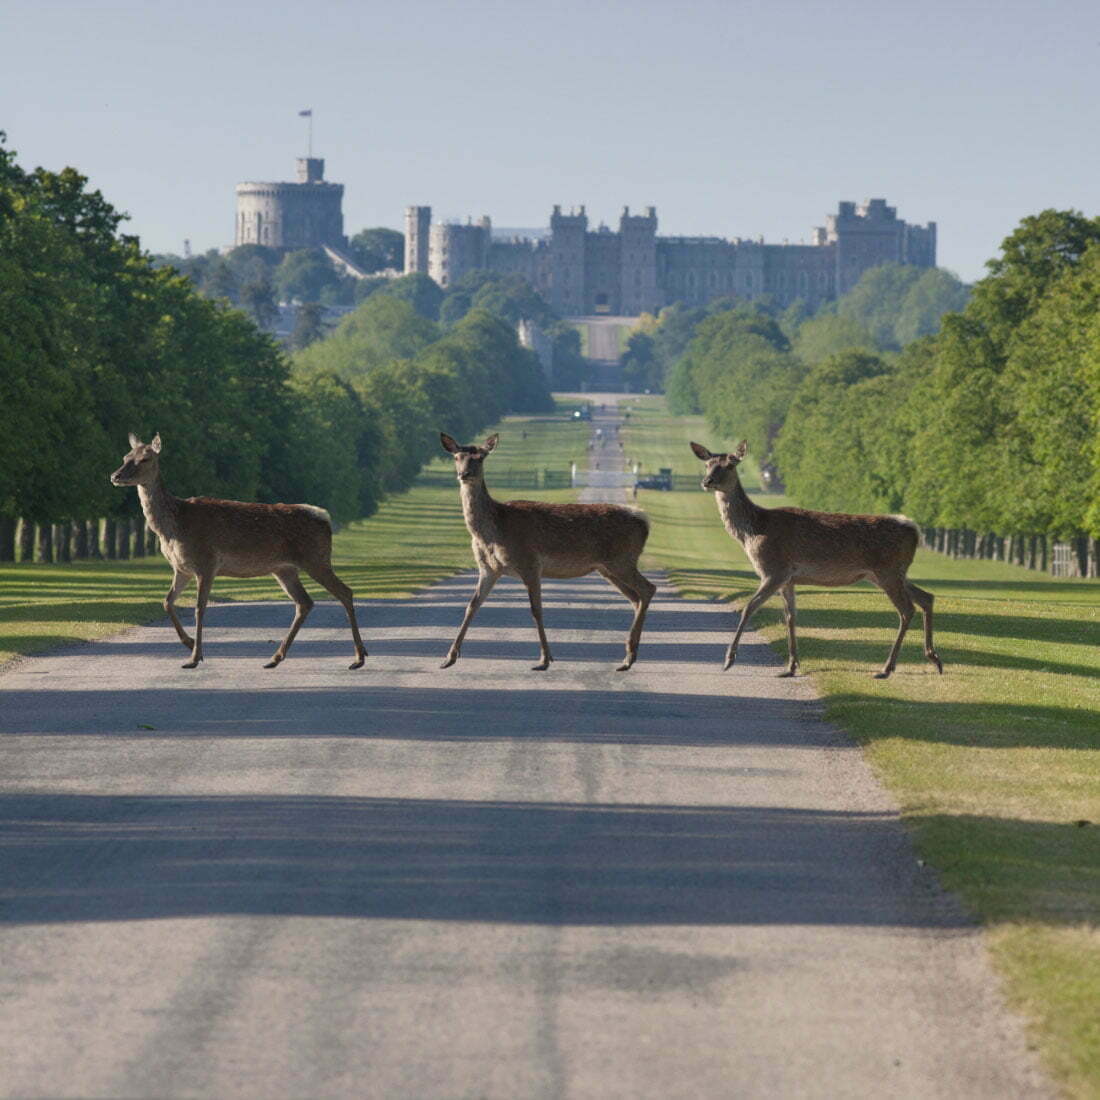 Three deer across the path with Windsor Castle in the background